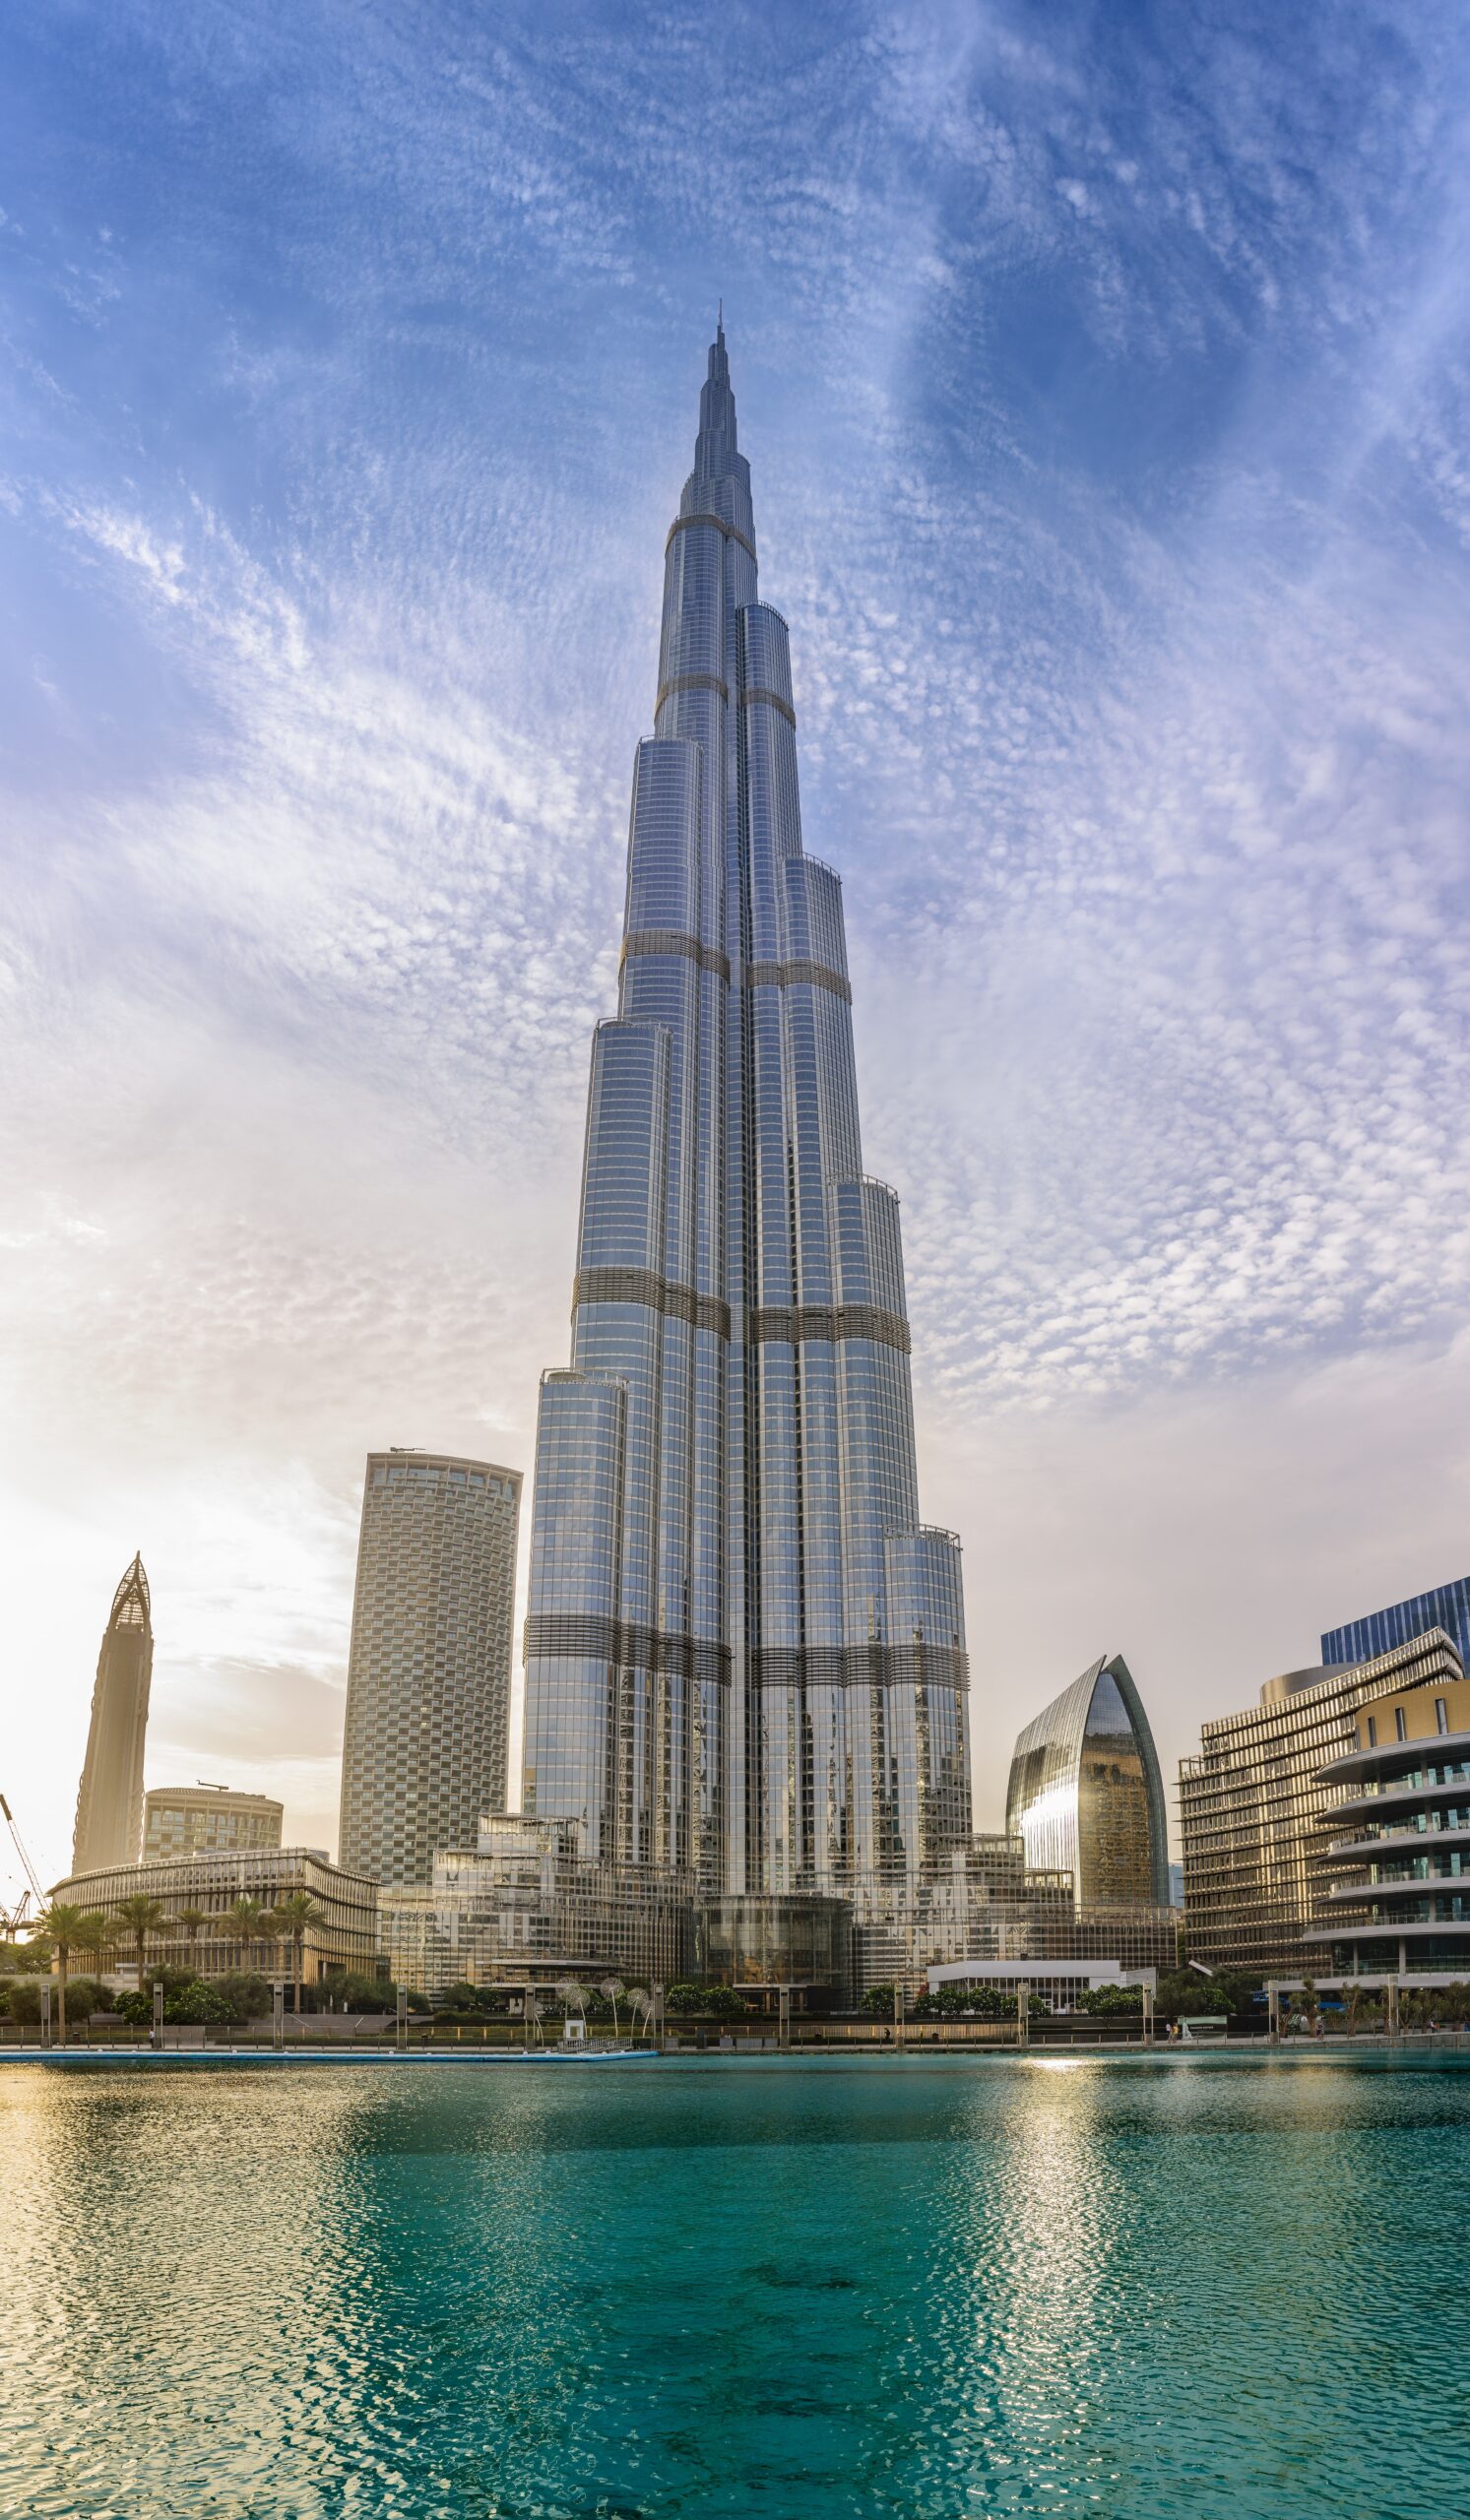 How to Set Up Business in Dubai